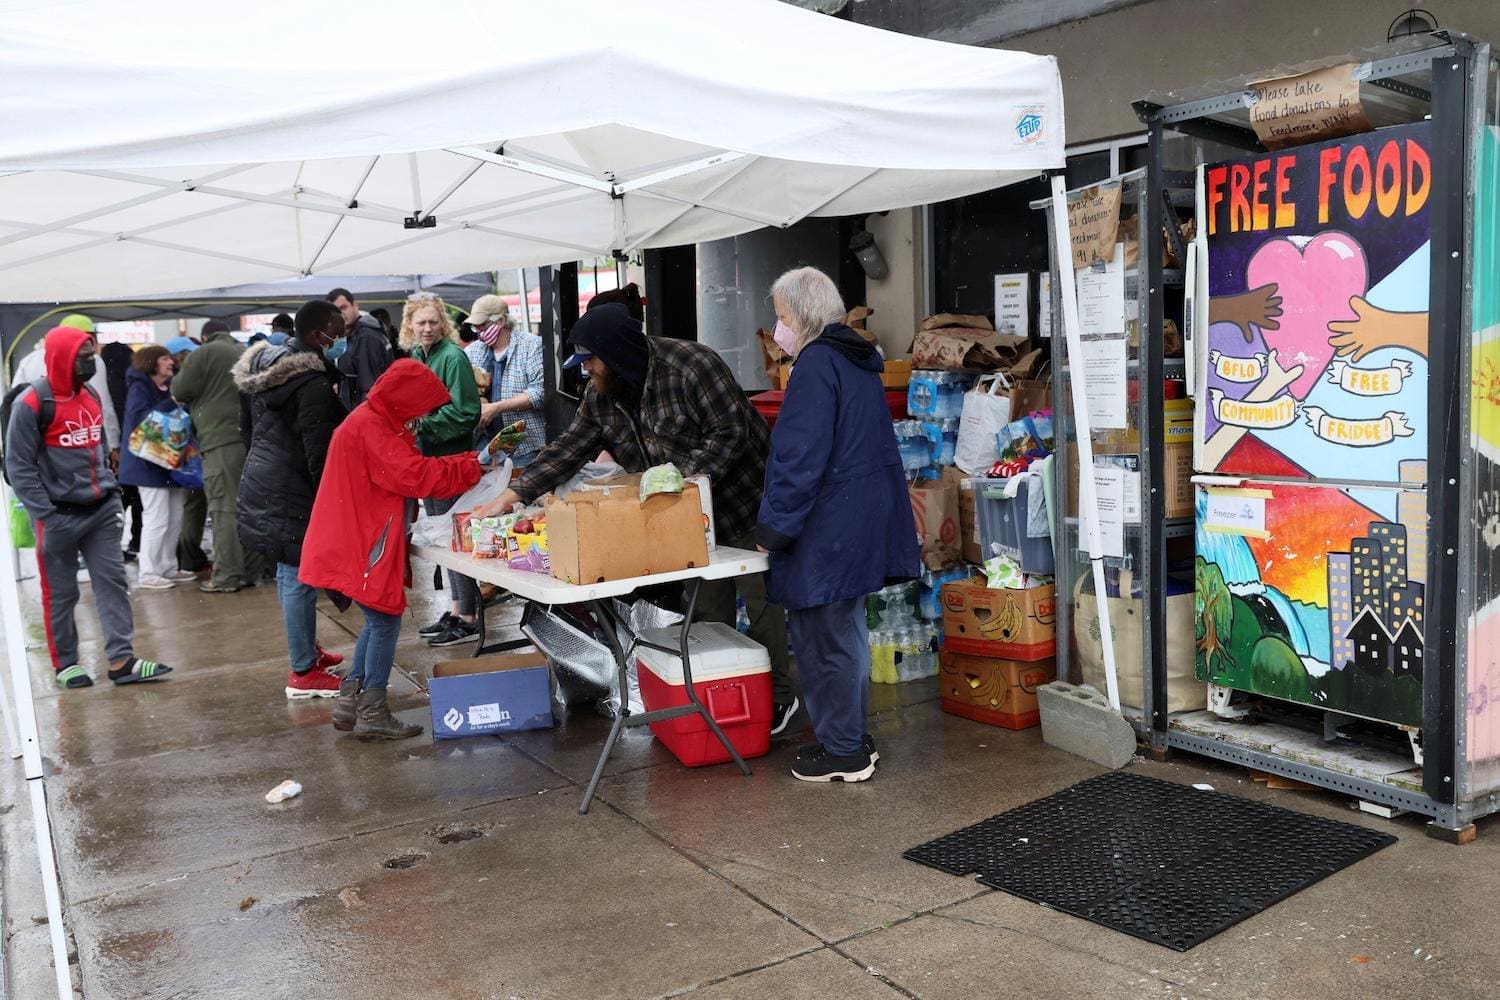 image of volunteers collecting food donations. it is raining so they are under a tent